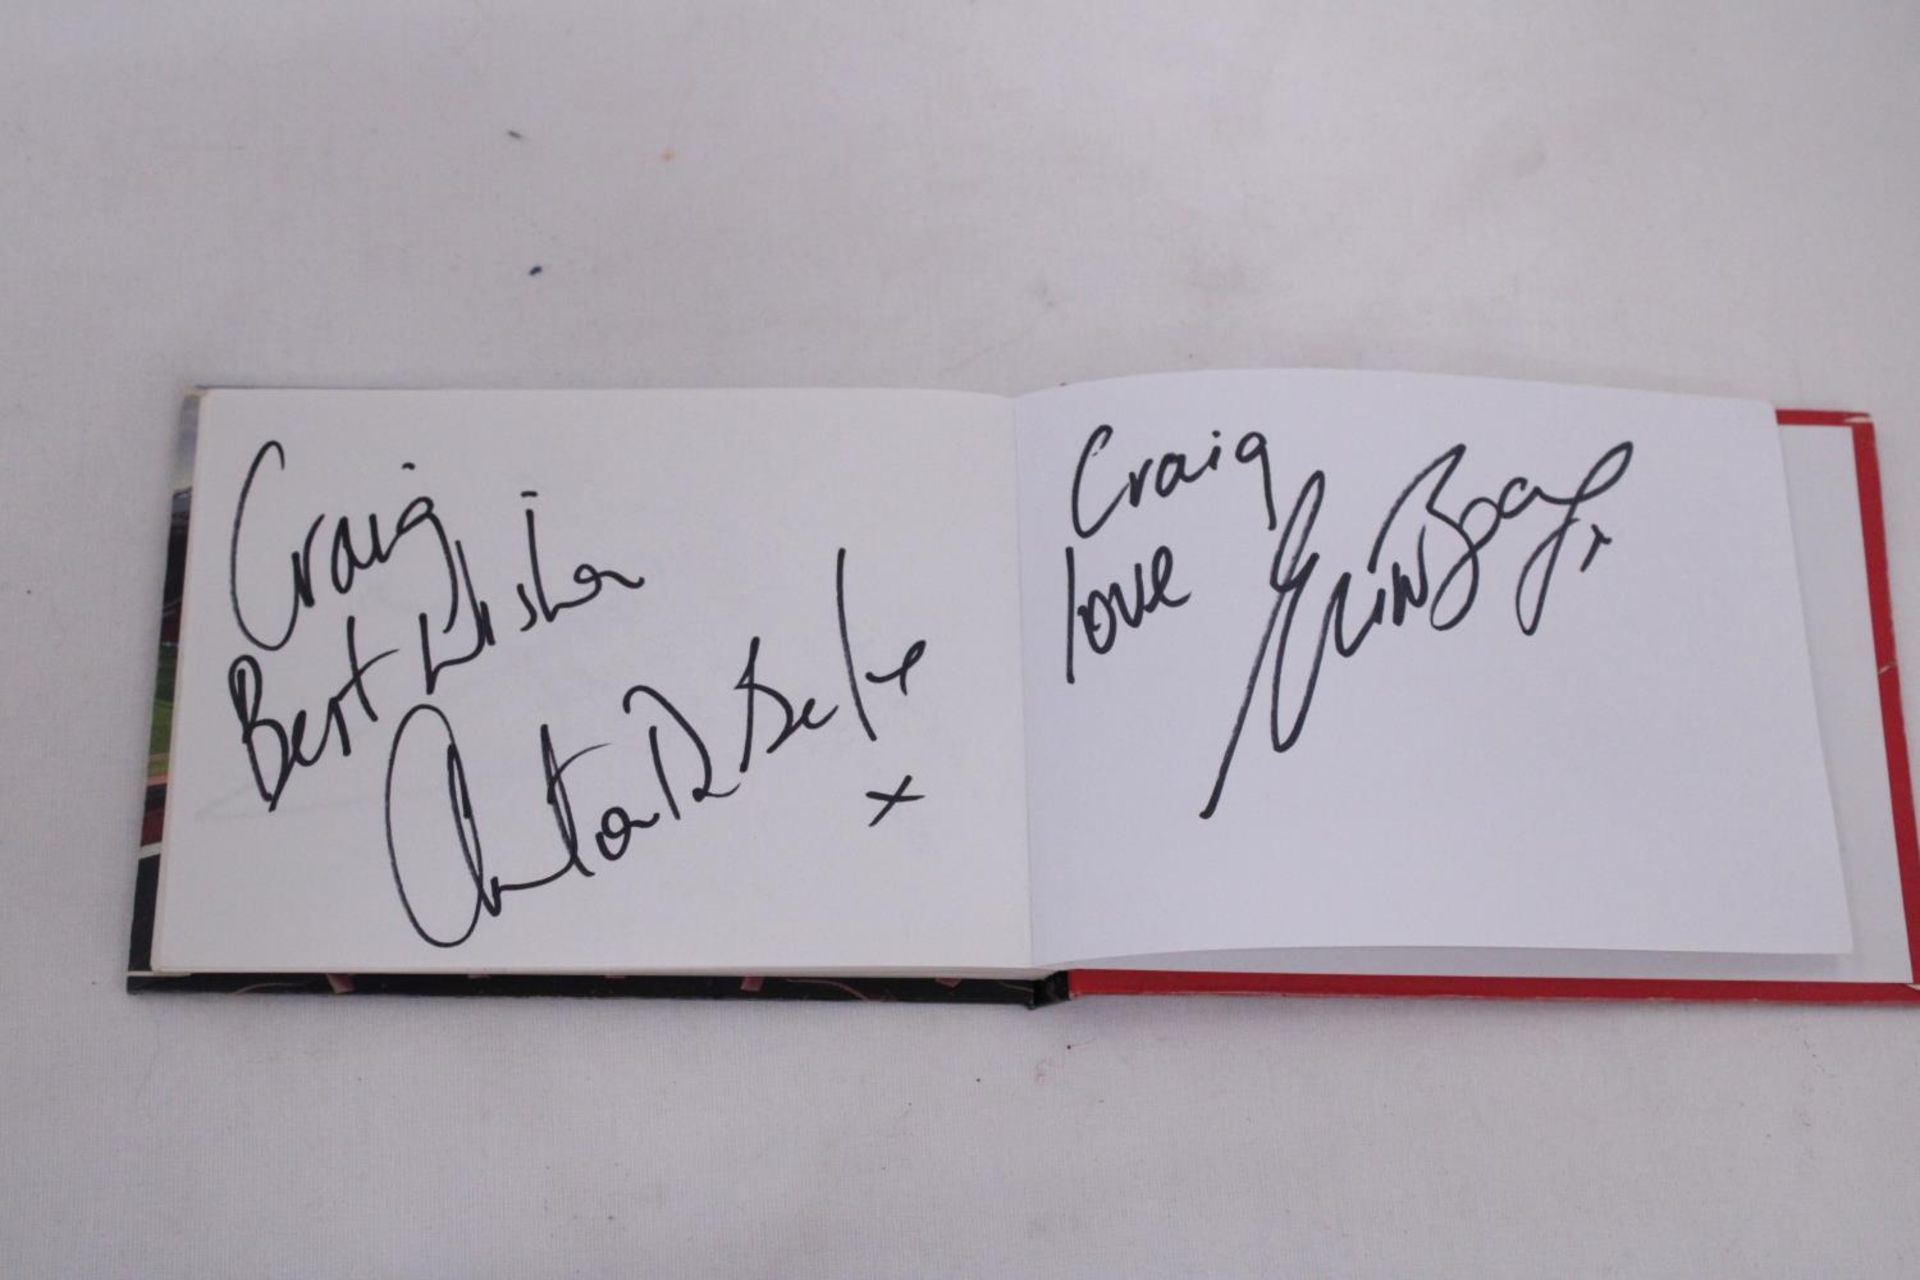 AN AUTOGRAPH BOOK FOR MACCLESFIELD DANCER, CRAIG, WHEN HE DANCED WITH MICHAEL JACKSON ON THE ' - Image 2 of 5